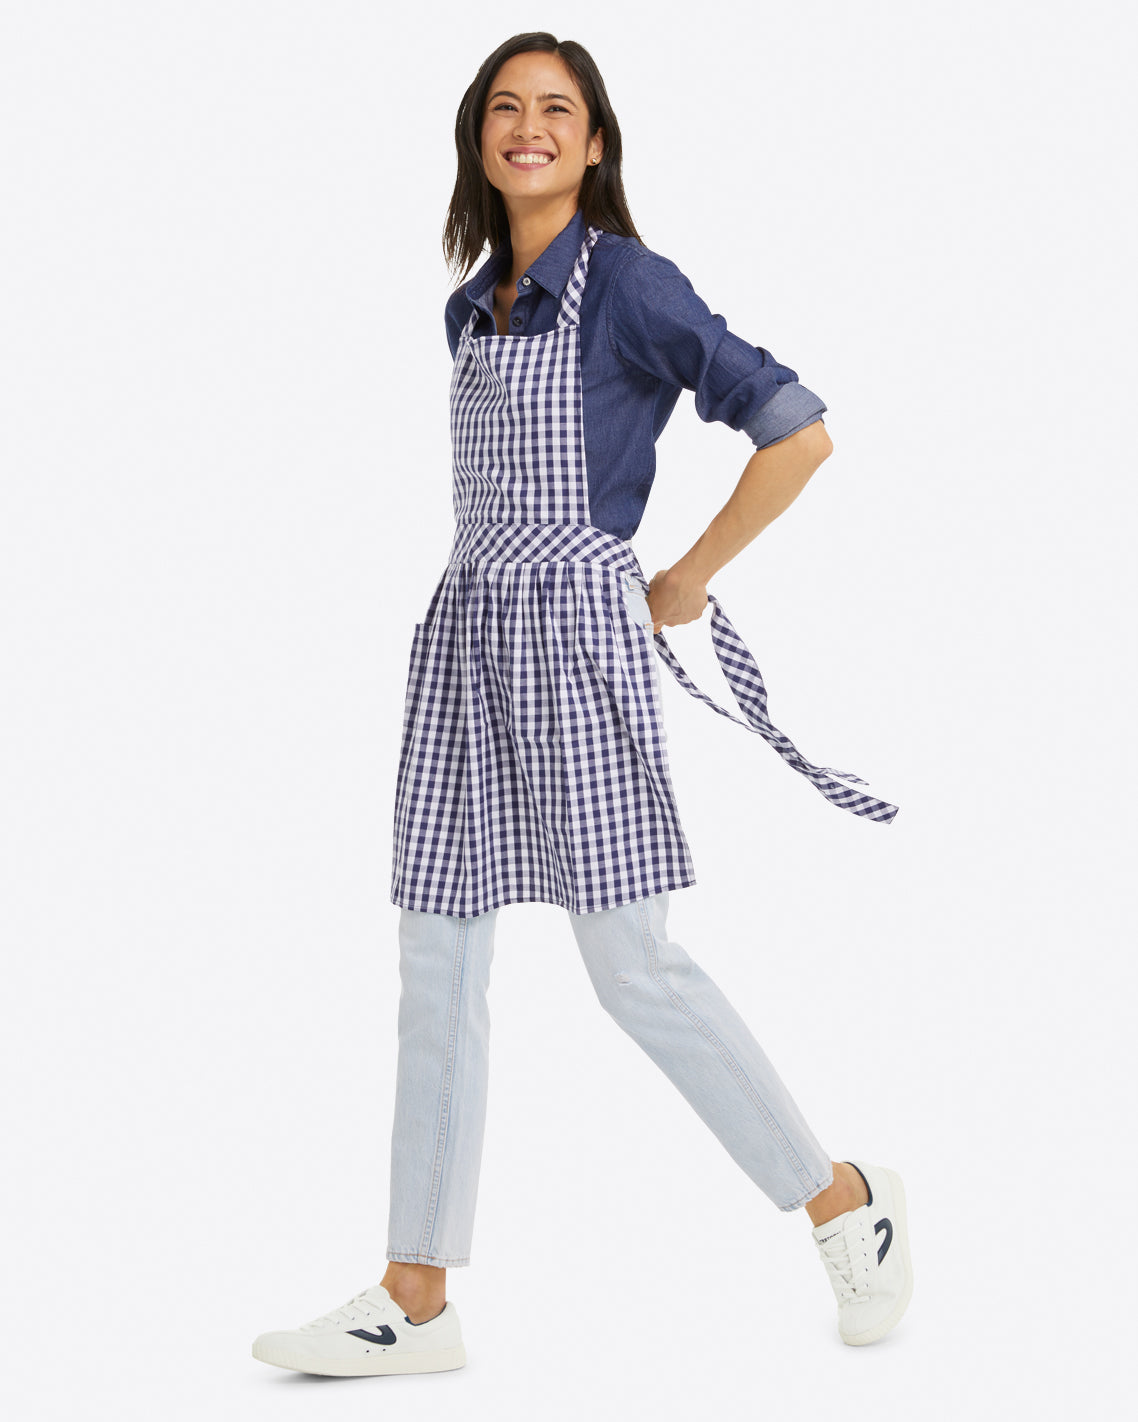 Apron in Gingham